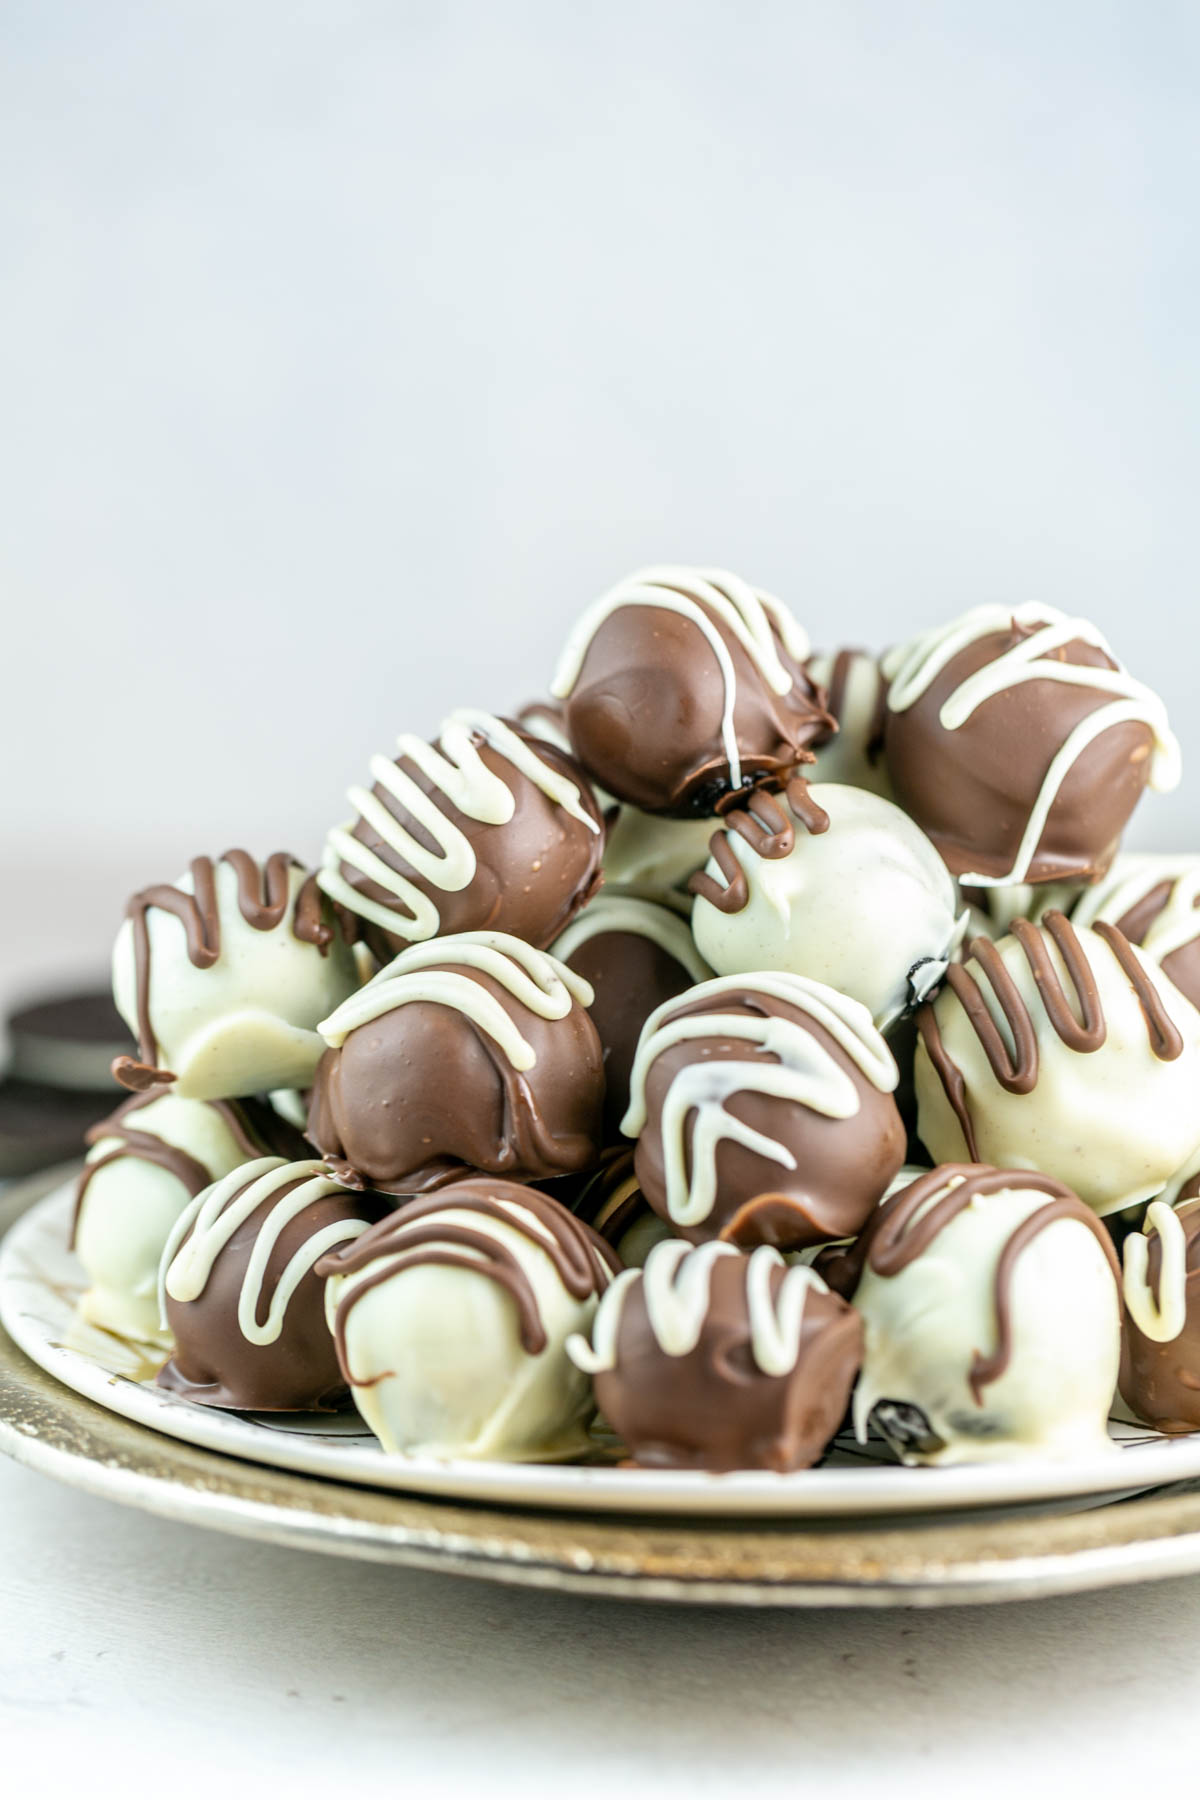 oreo balls piled on a decorative gold plate